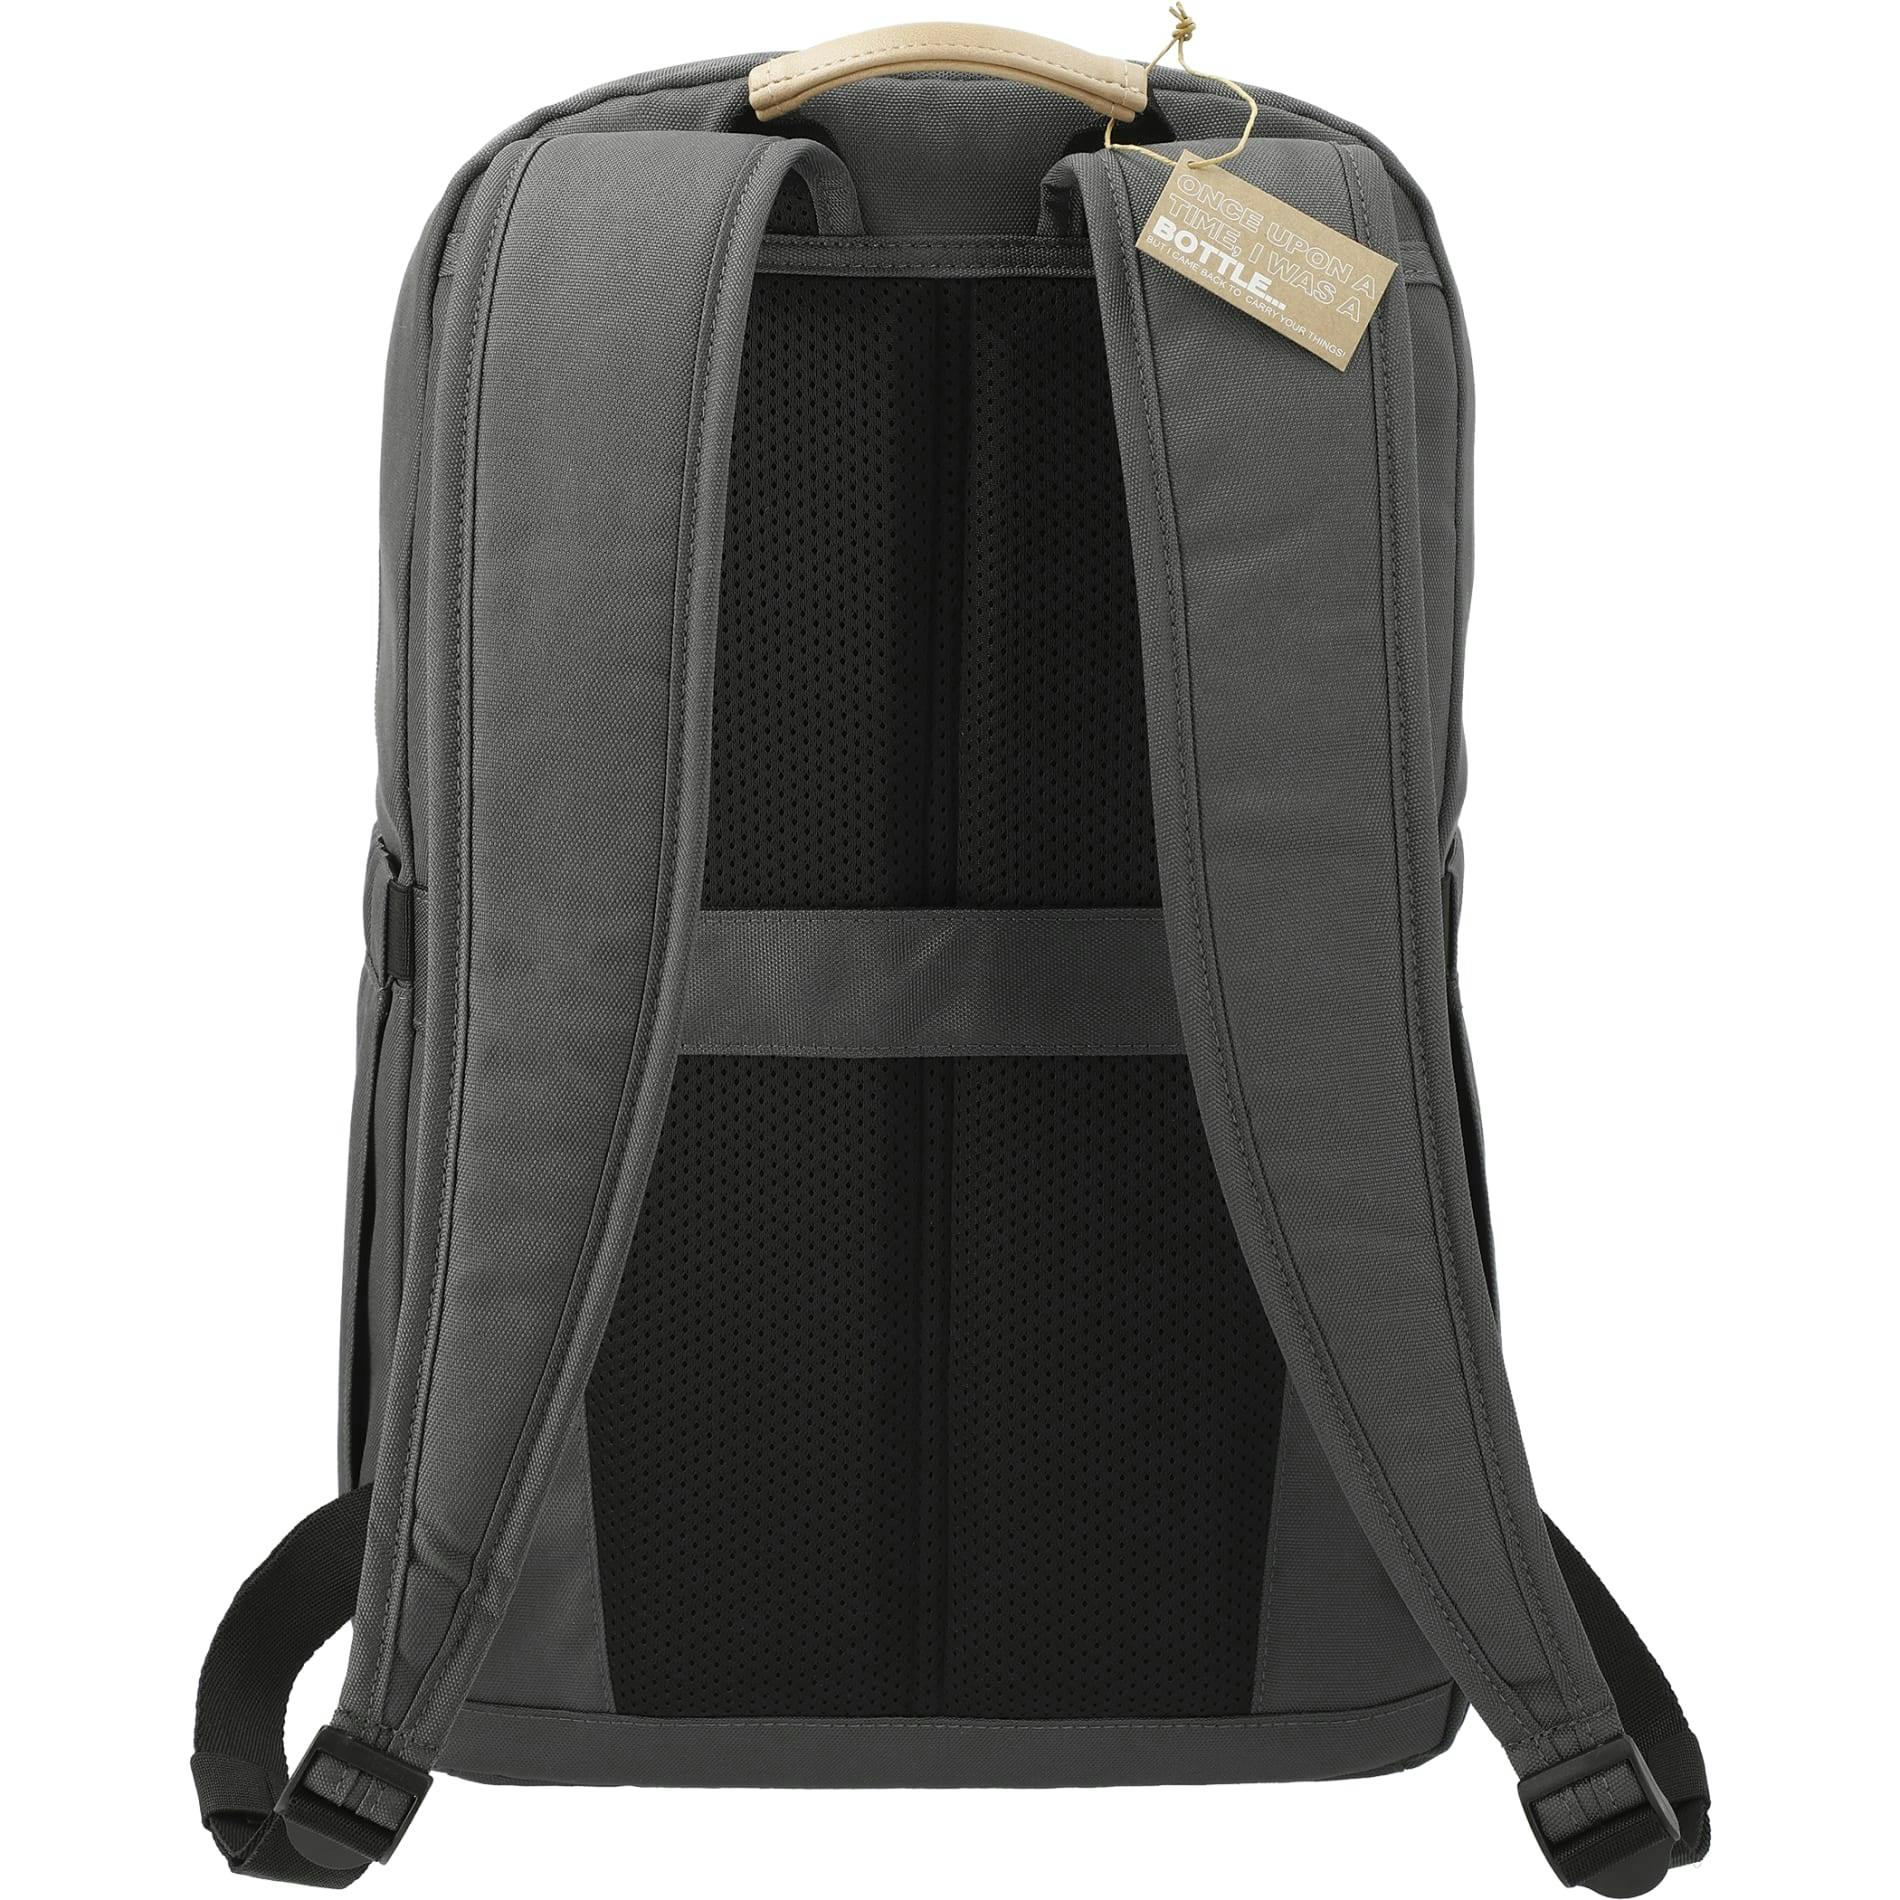 Aft Recycled 15" Computer Modular Backpack - additional Image 3